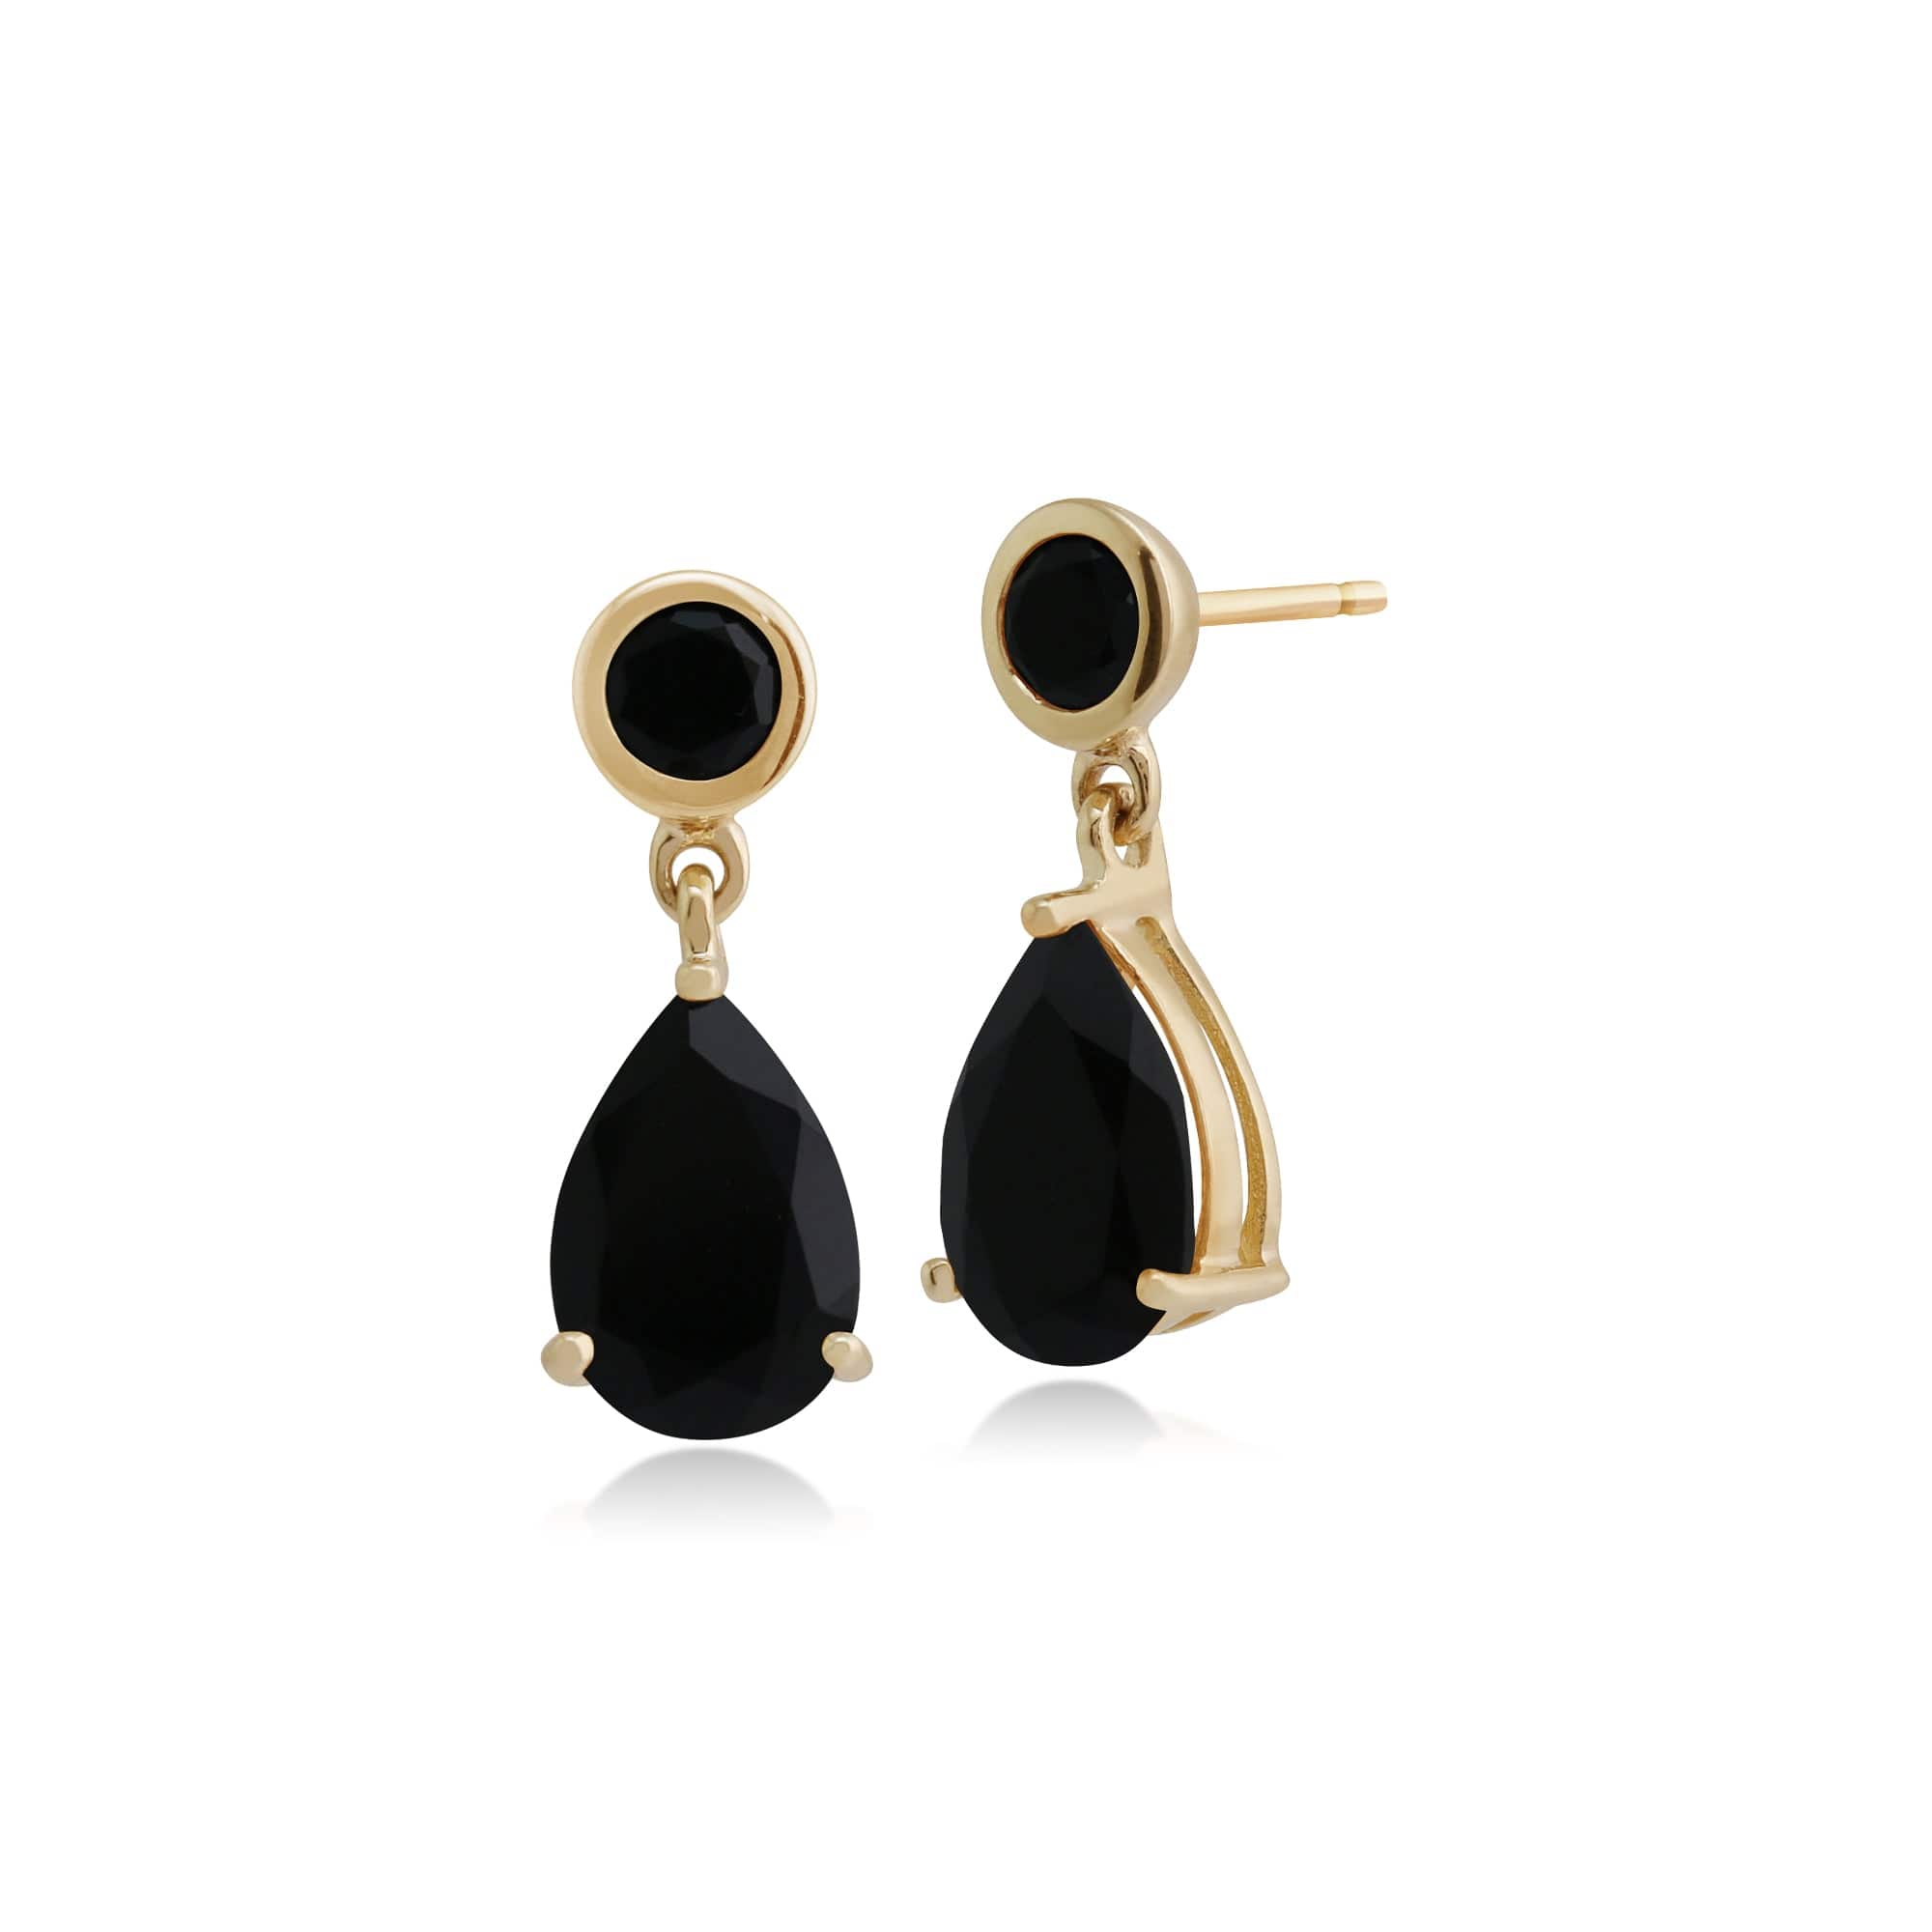 Classic Pear & Round Black Onyx Drop Earrings in 9ct Yellow Gold - Gemondo